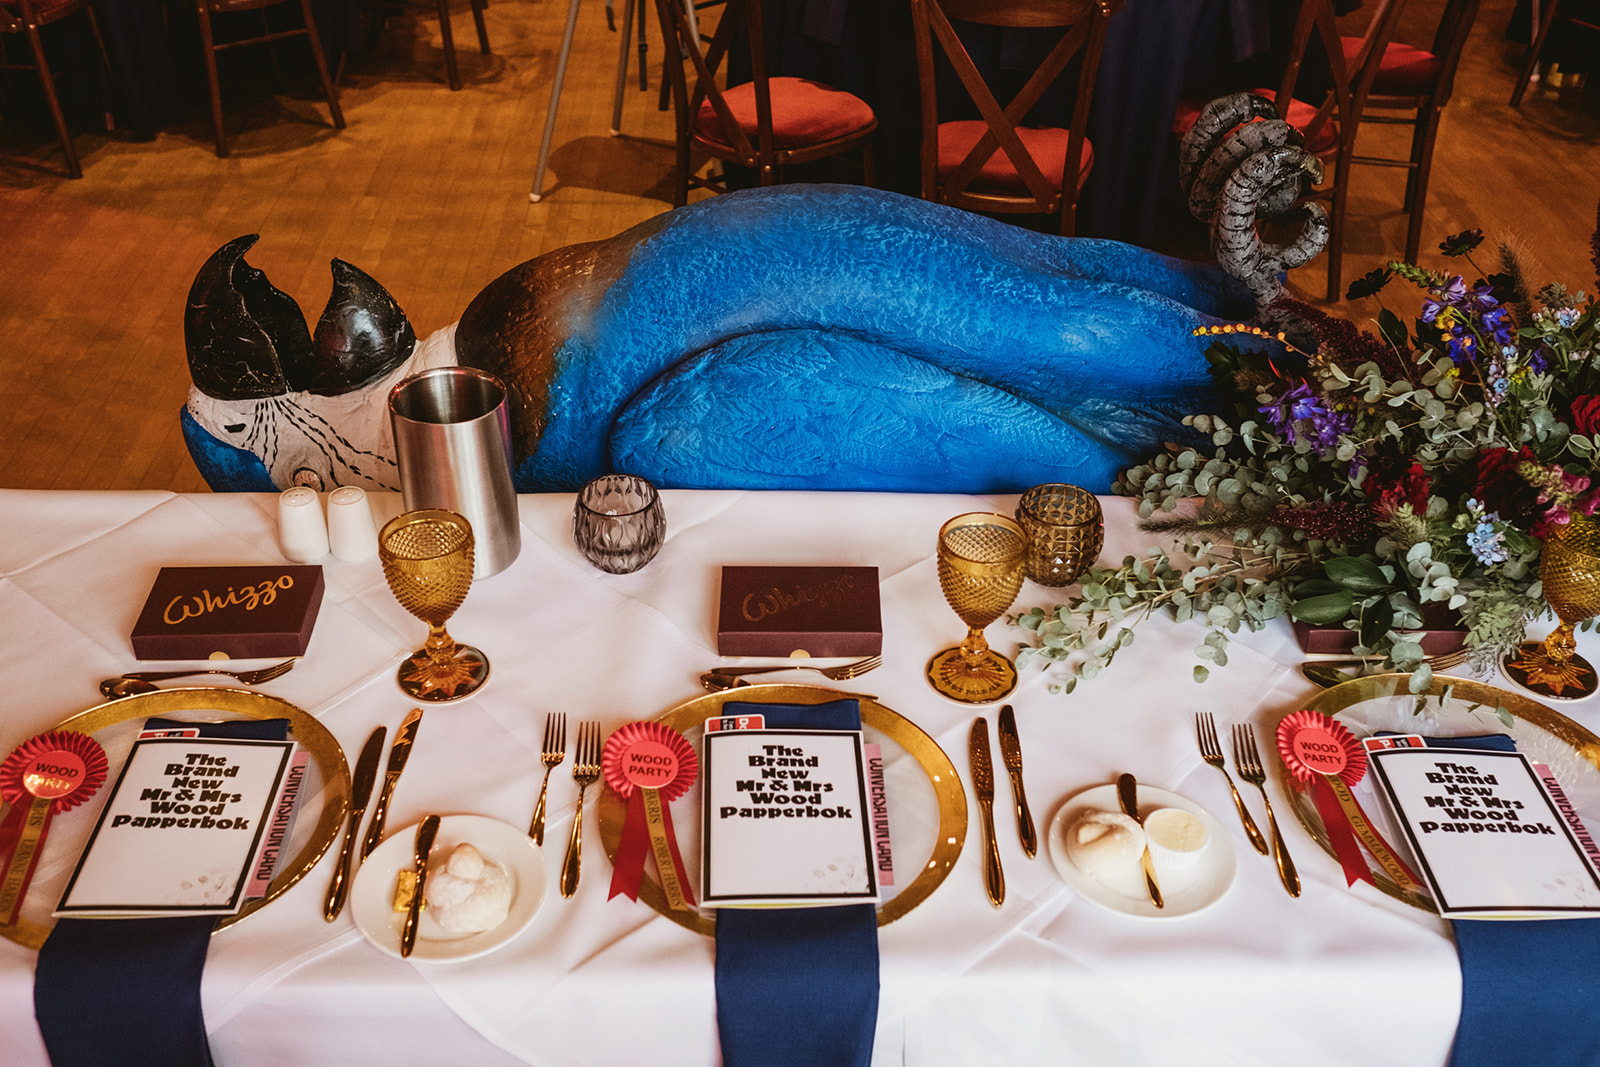 A unique and quirky Ravenswood Sussex wedding with London wedding photographers York Place Studios